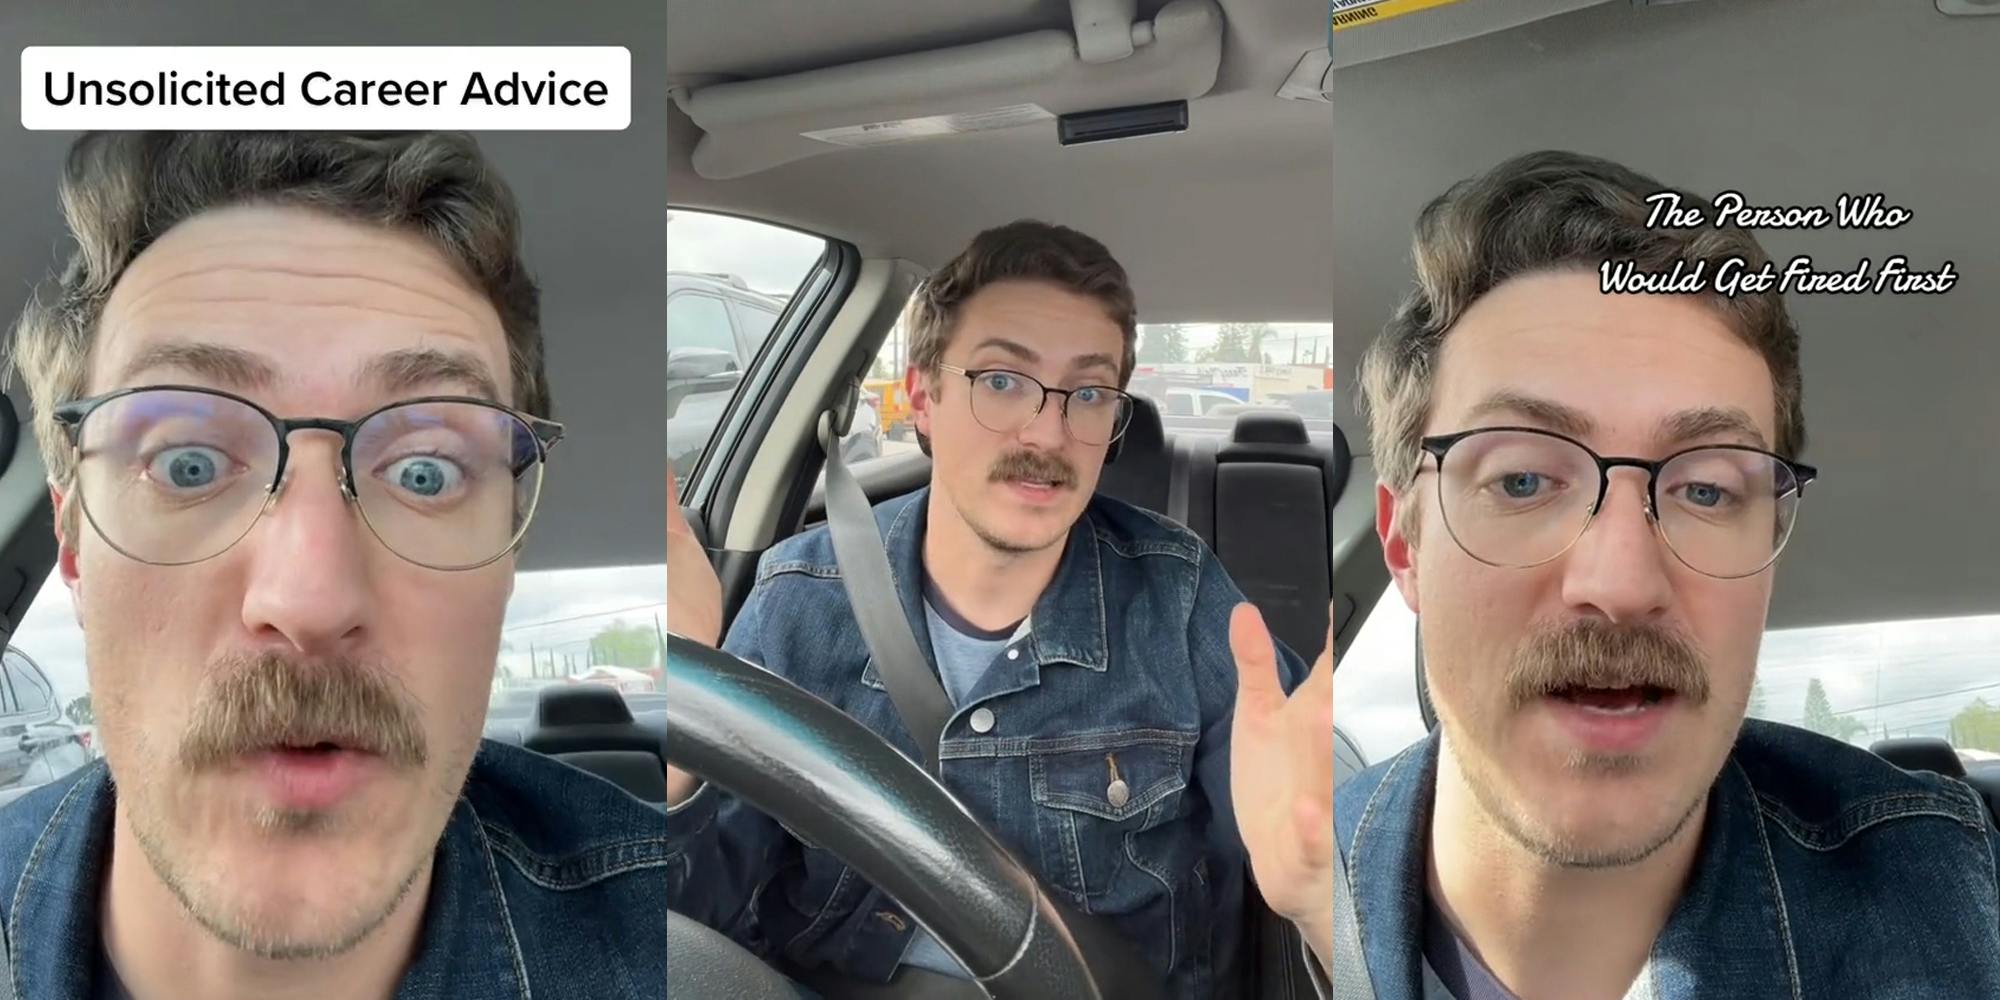 worker speaking in car with caption "Unsolicited Career Advice" (l) worker speaking in car with hands up (c) worker speaking in car with caption "The Person Who Would Get Fired First" (r)